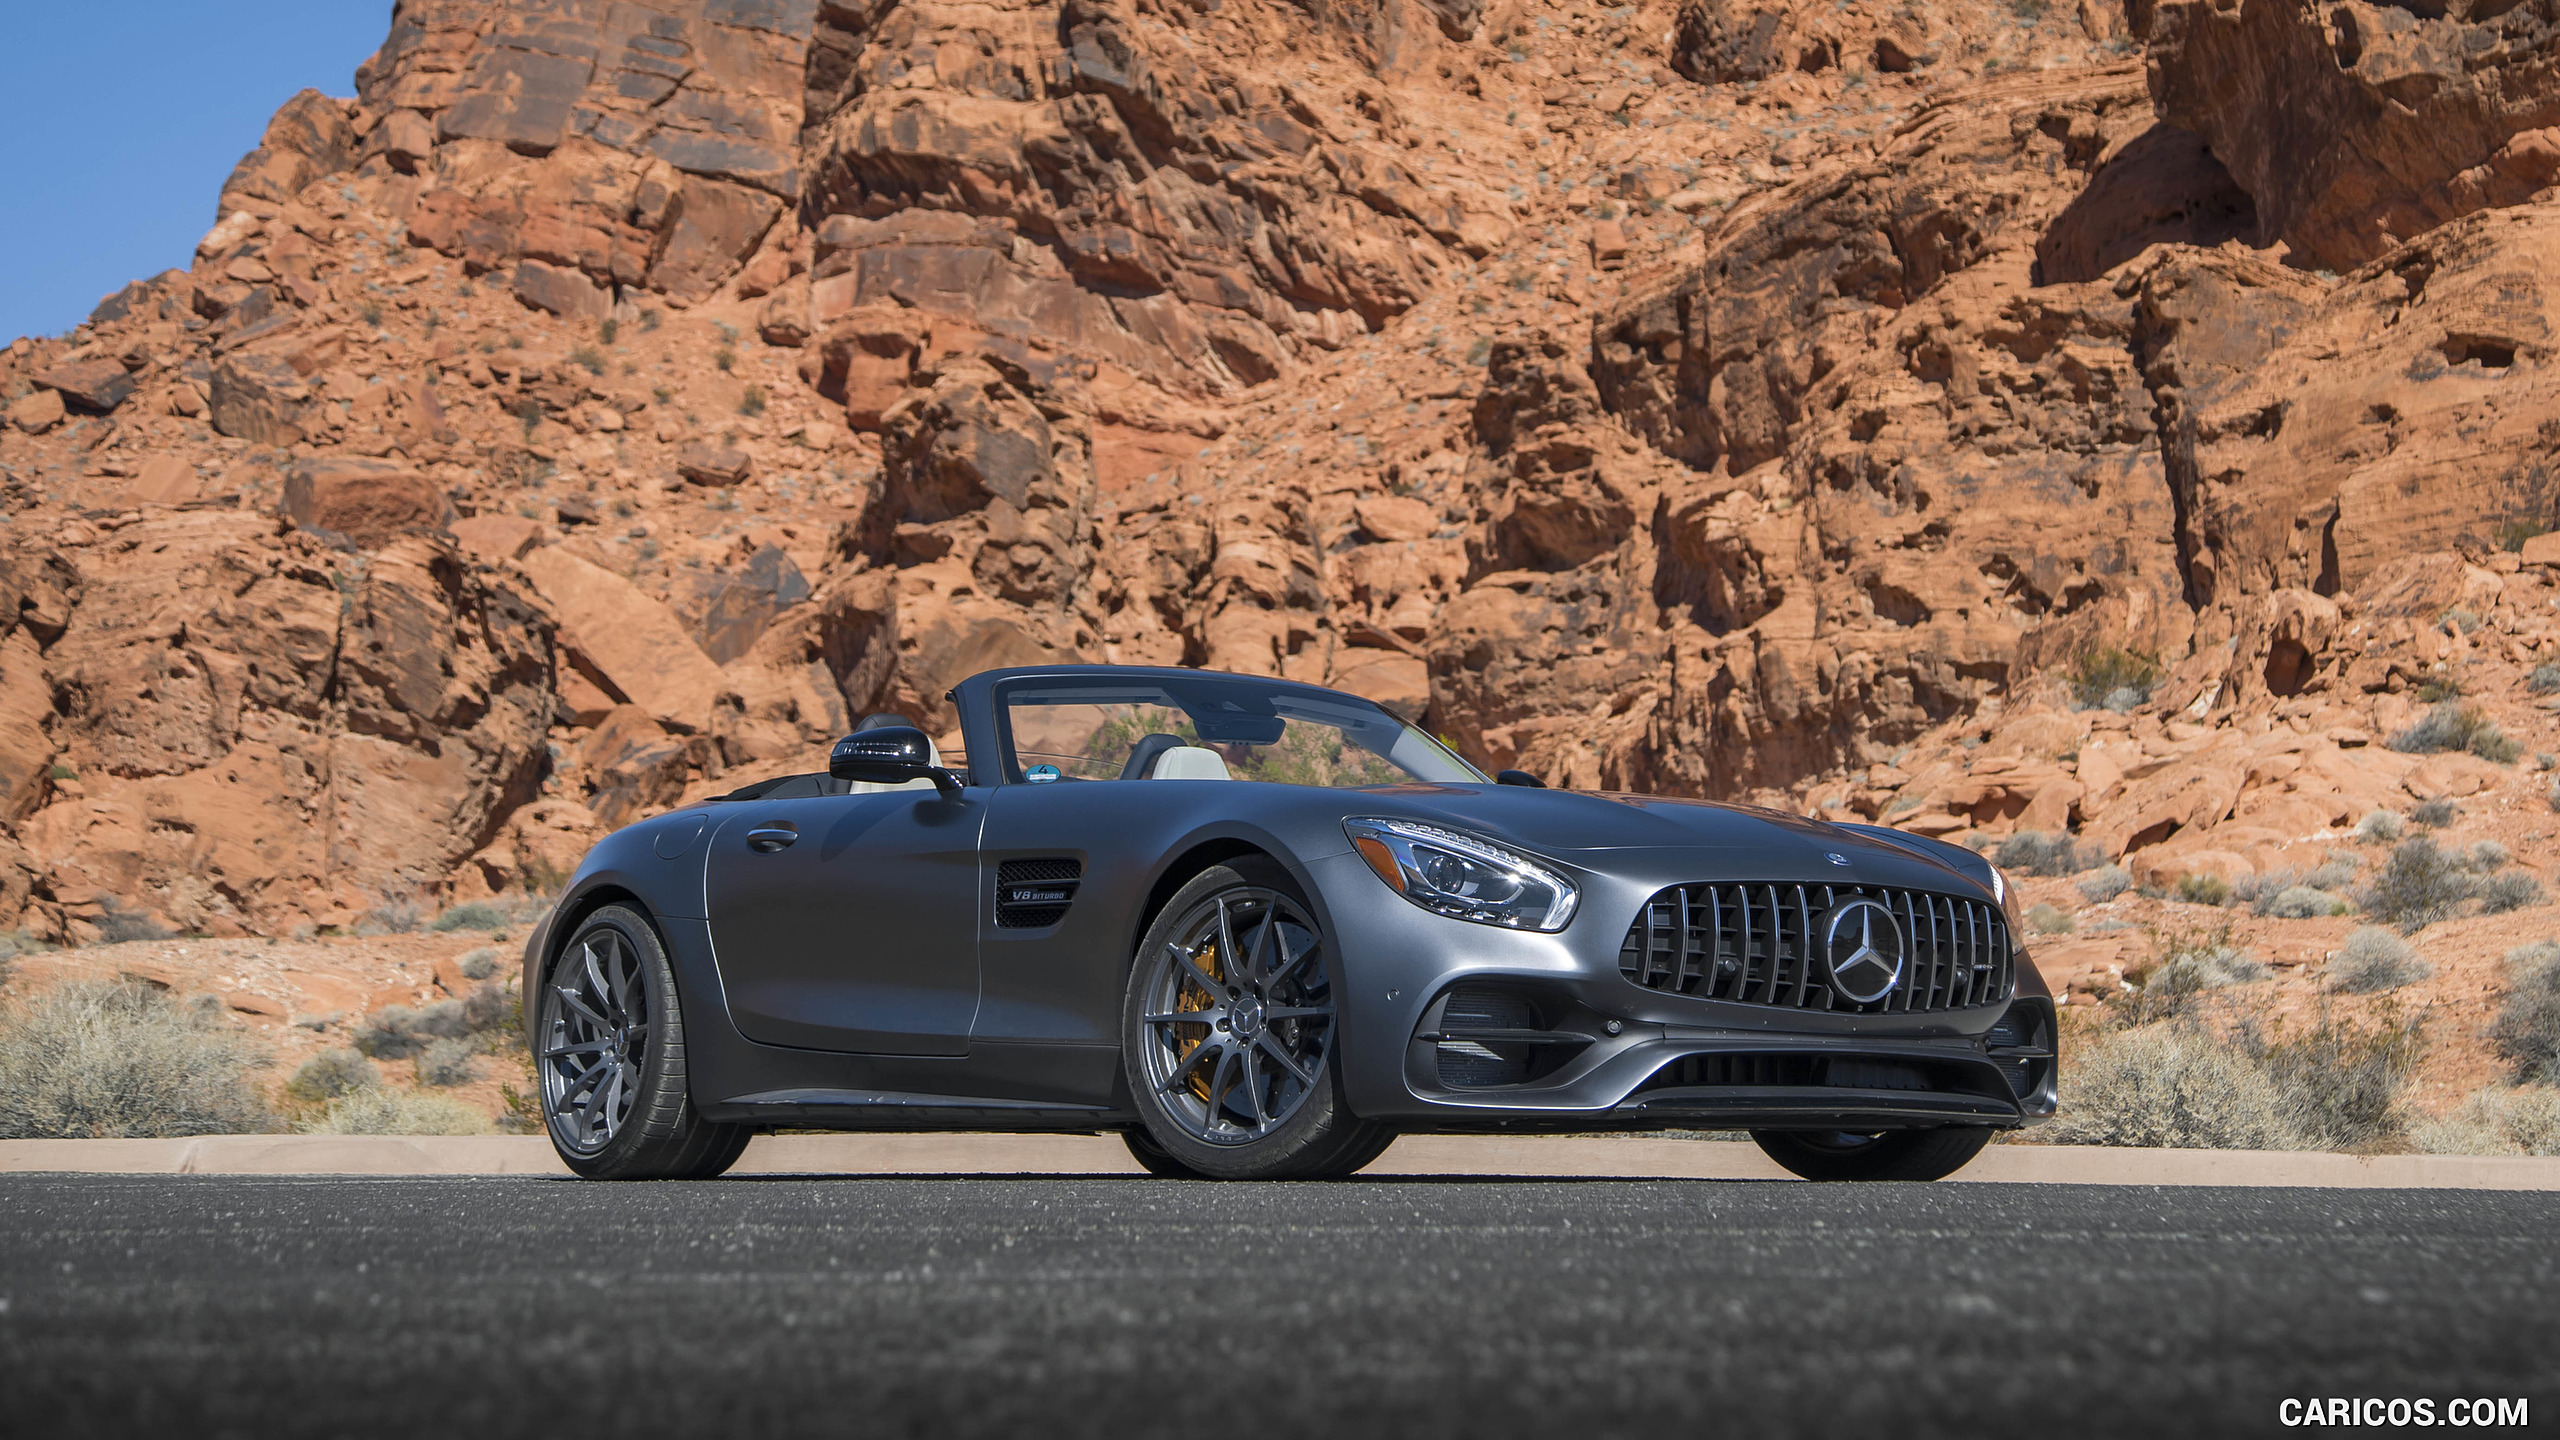 2018 Mercedes-AMG GT C Roadster - Front Three-Quarter, #44 of 350